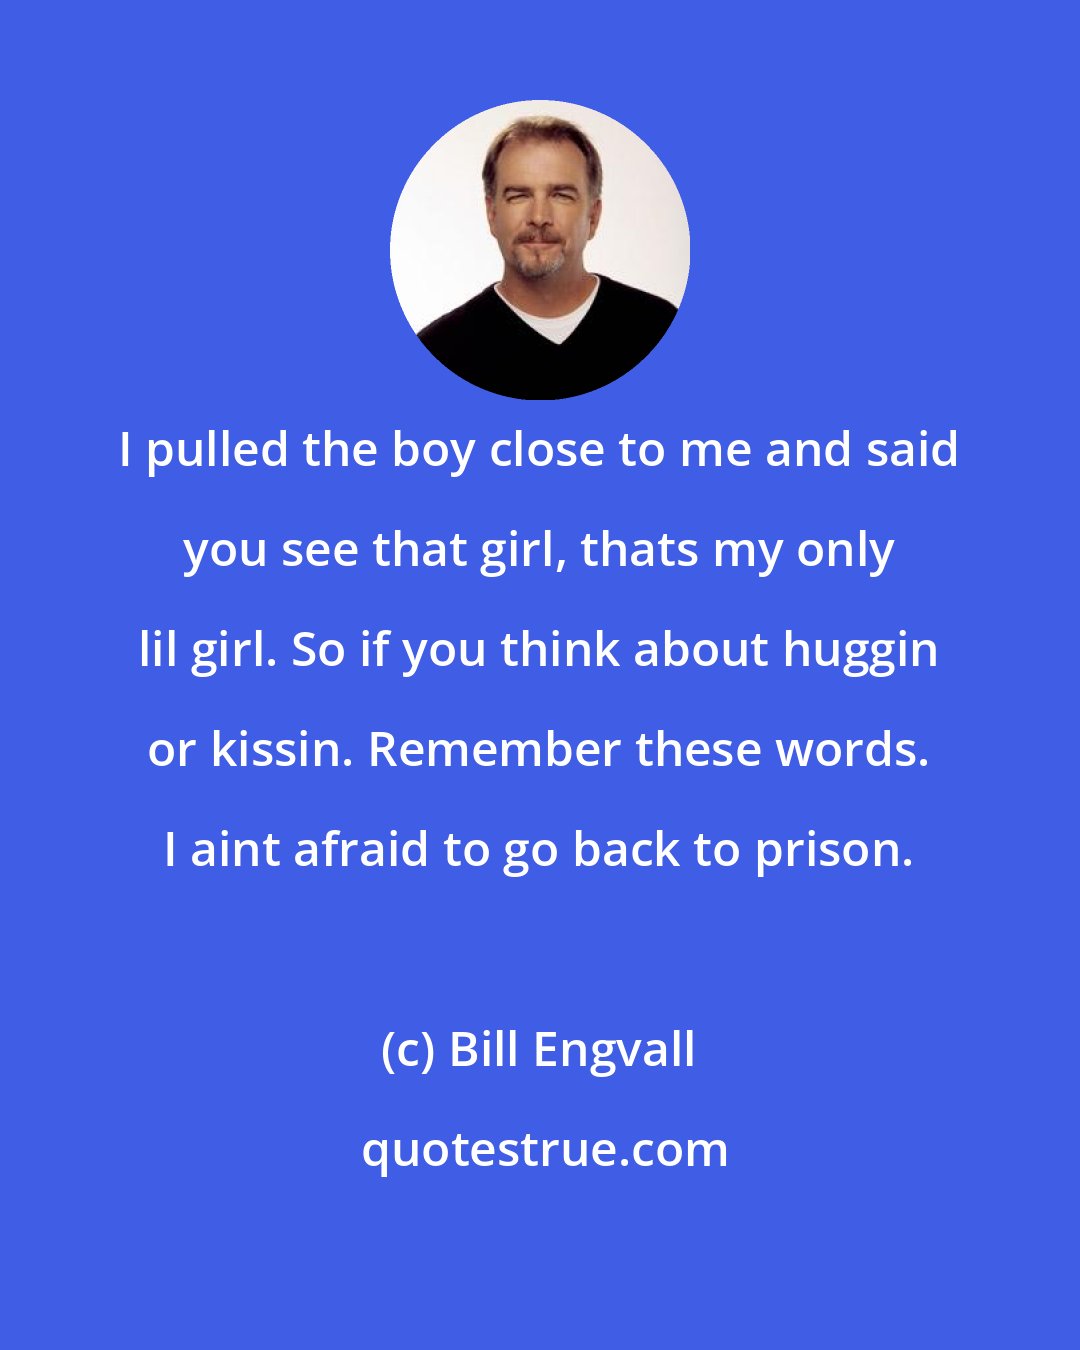 Bill Engvall: I pulled the boy close to me and said you see that girl, thats my only lil girl. So if you think about huggin or kissin. Remember these words. I aint afraid to go back to prison.